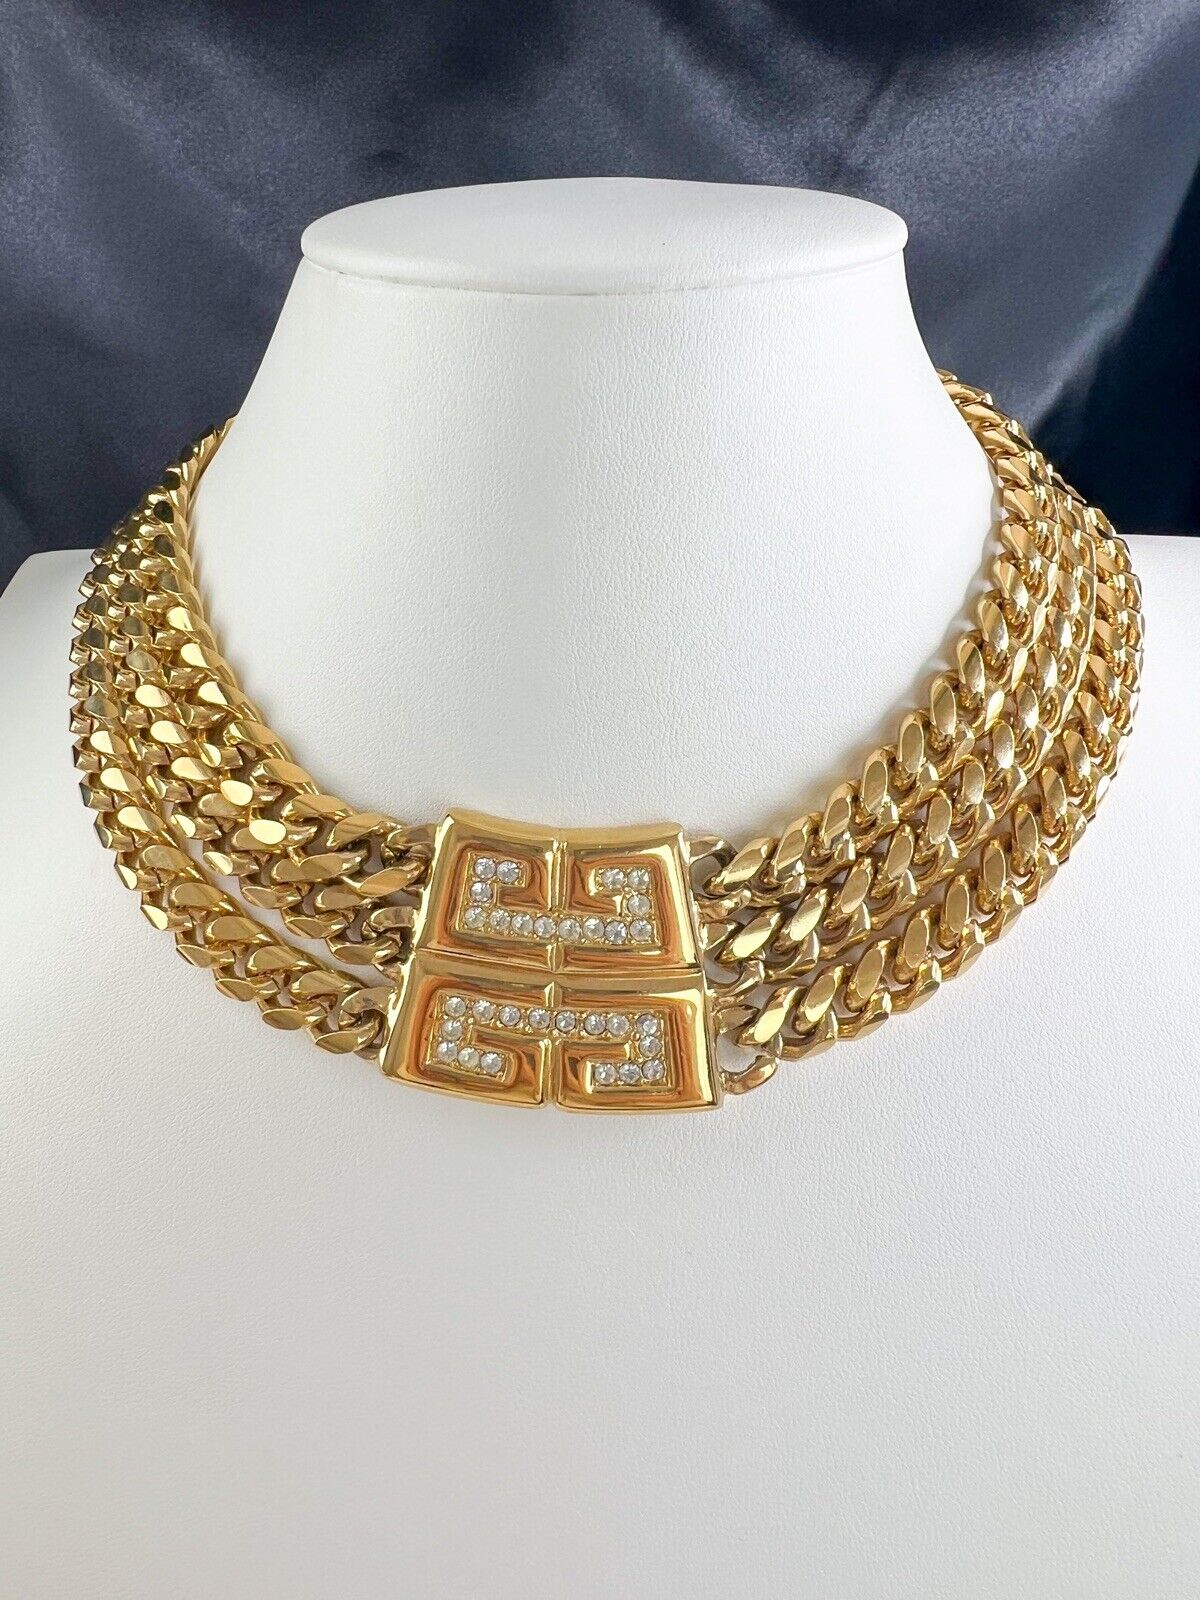 Givenchy Gold Tone 3 Row Chain Link Massive Logo Choker Necklace Vintage